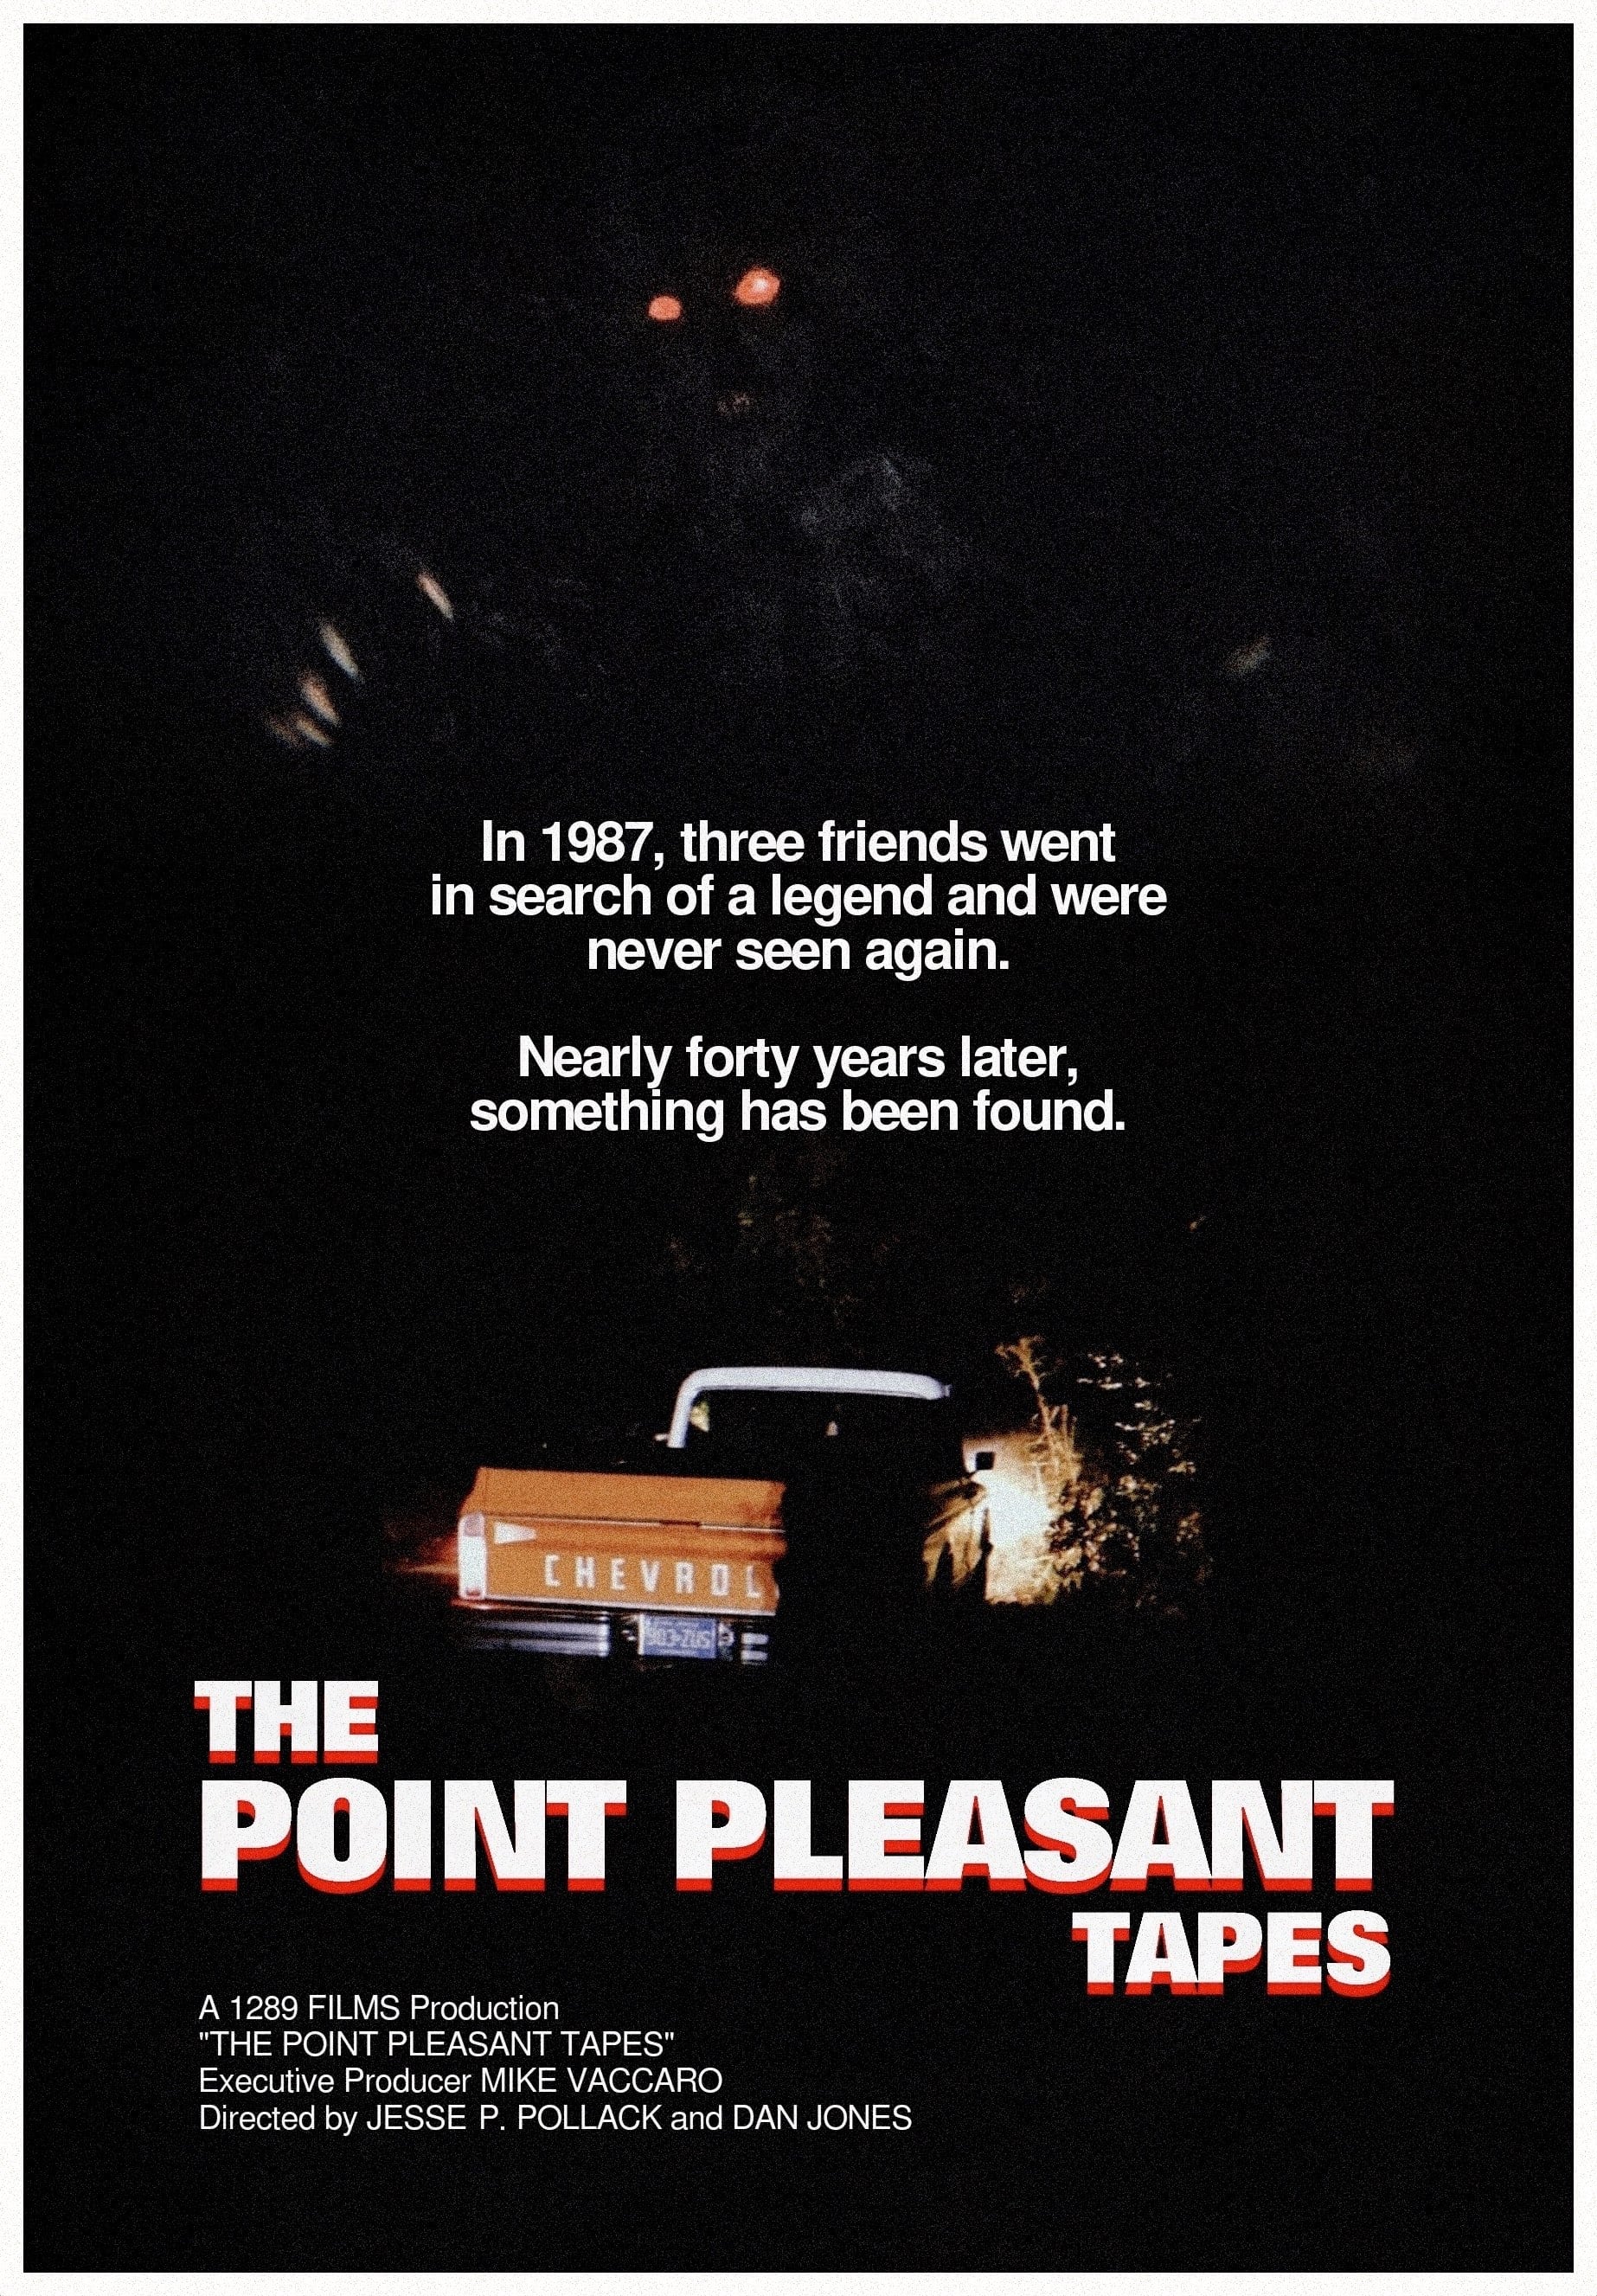 The Point Pleasant Tapes